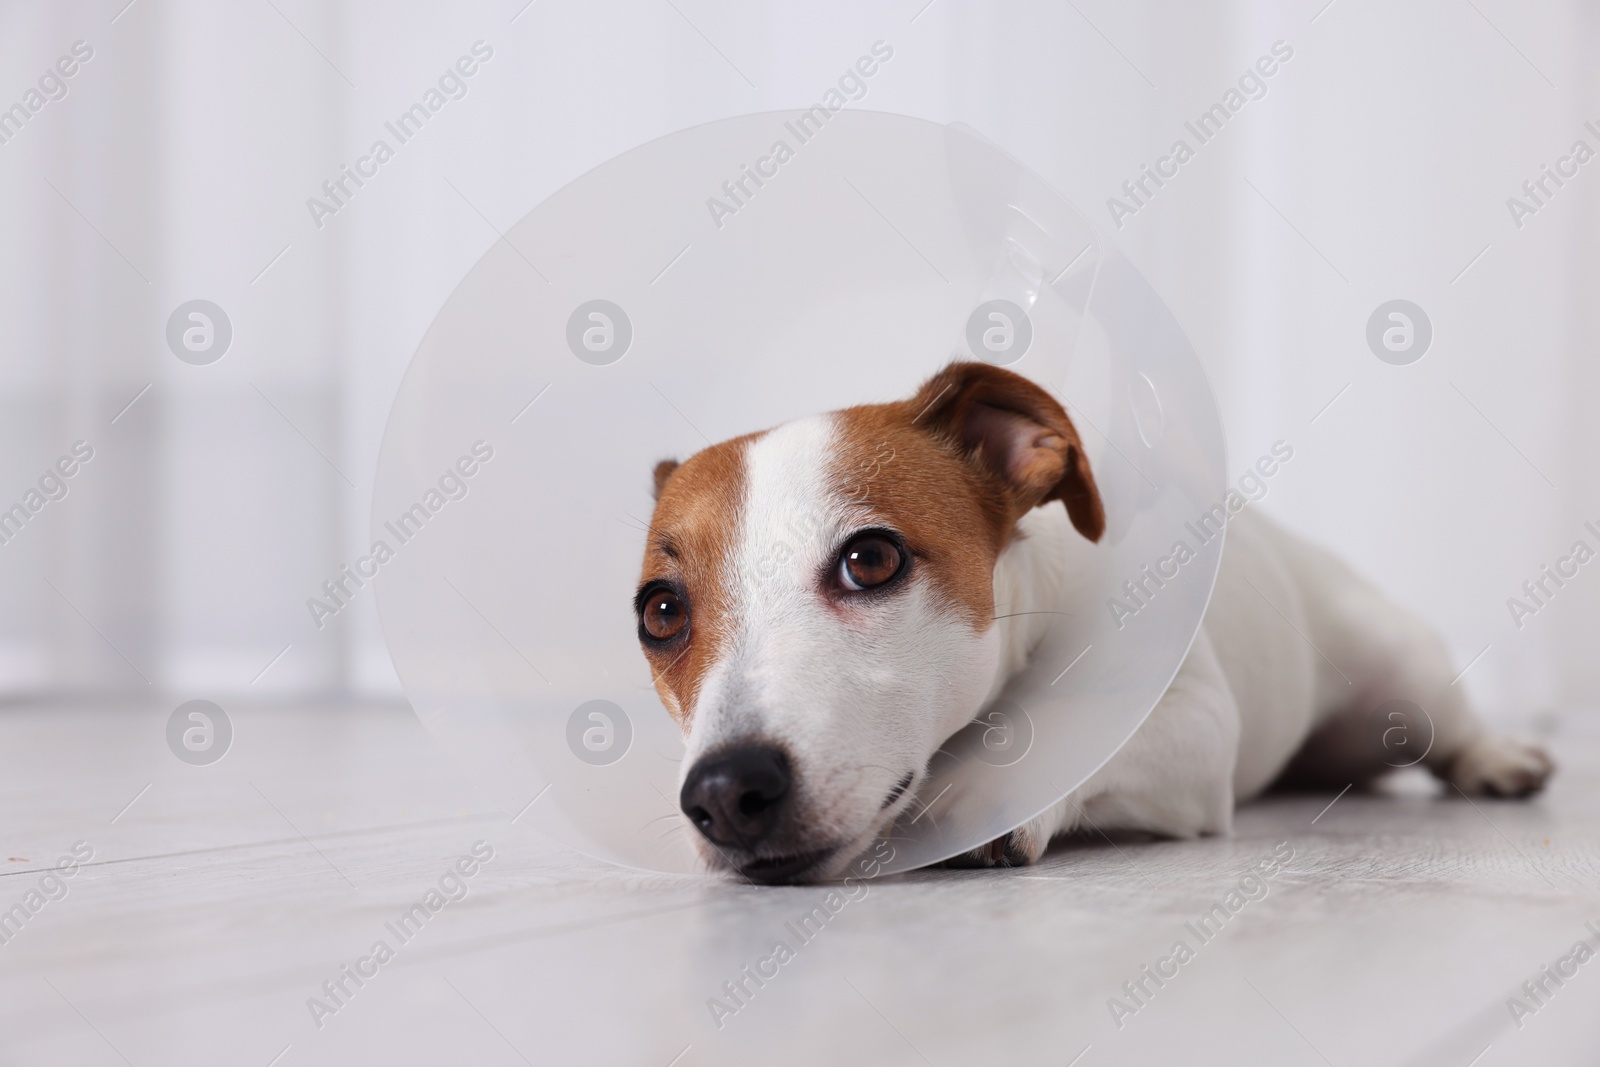 Photo of Cute Jack Russell Terrier dog wearing medical plastic collar on floor indoors